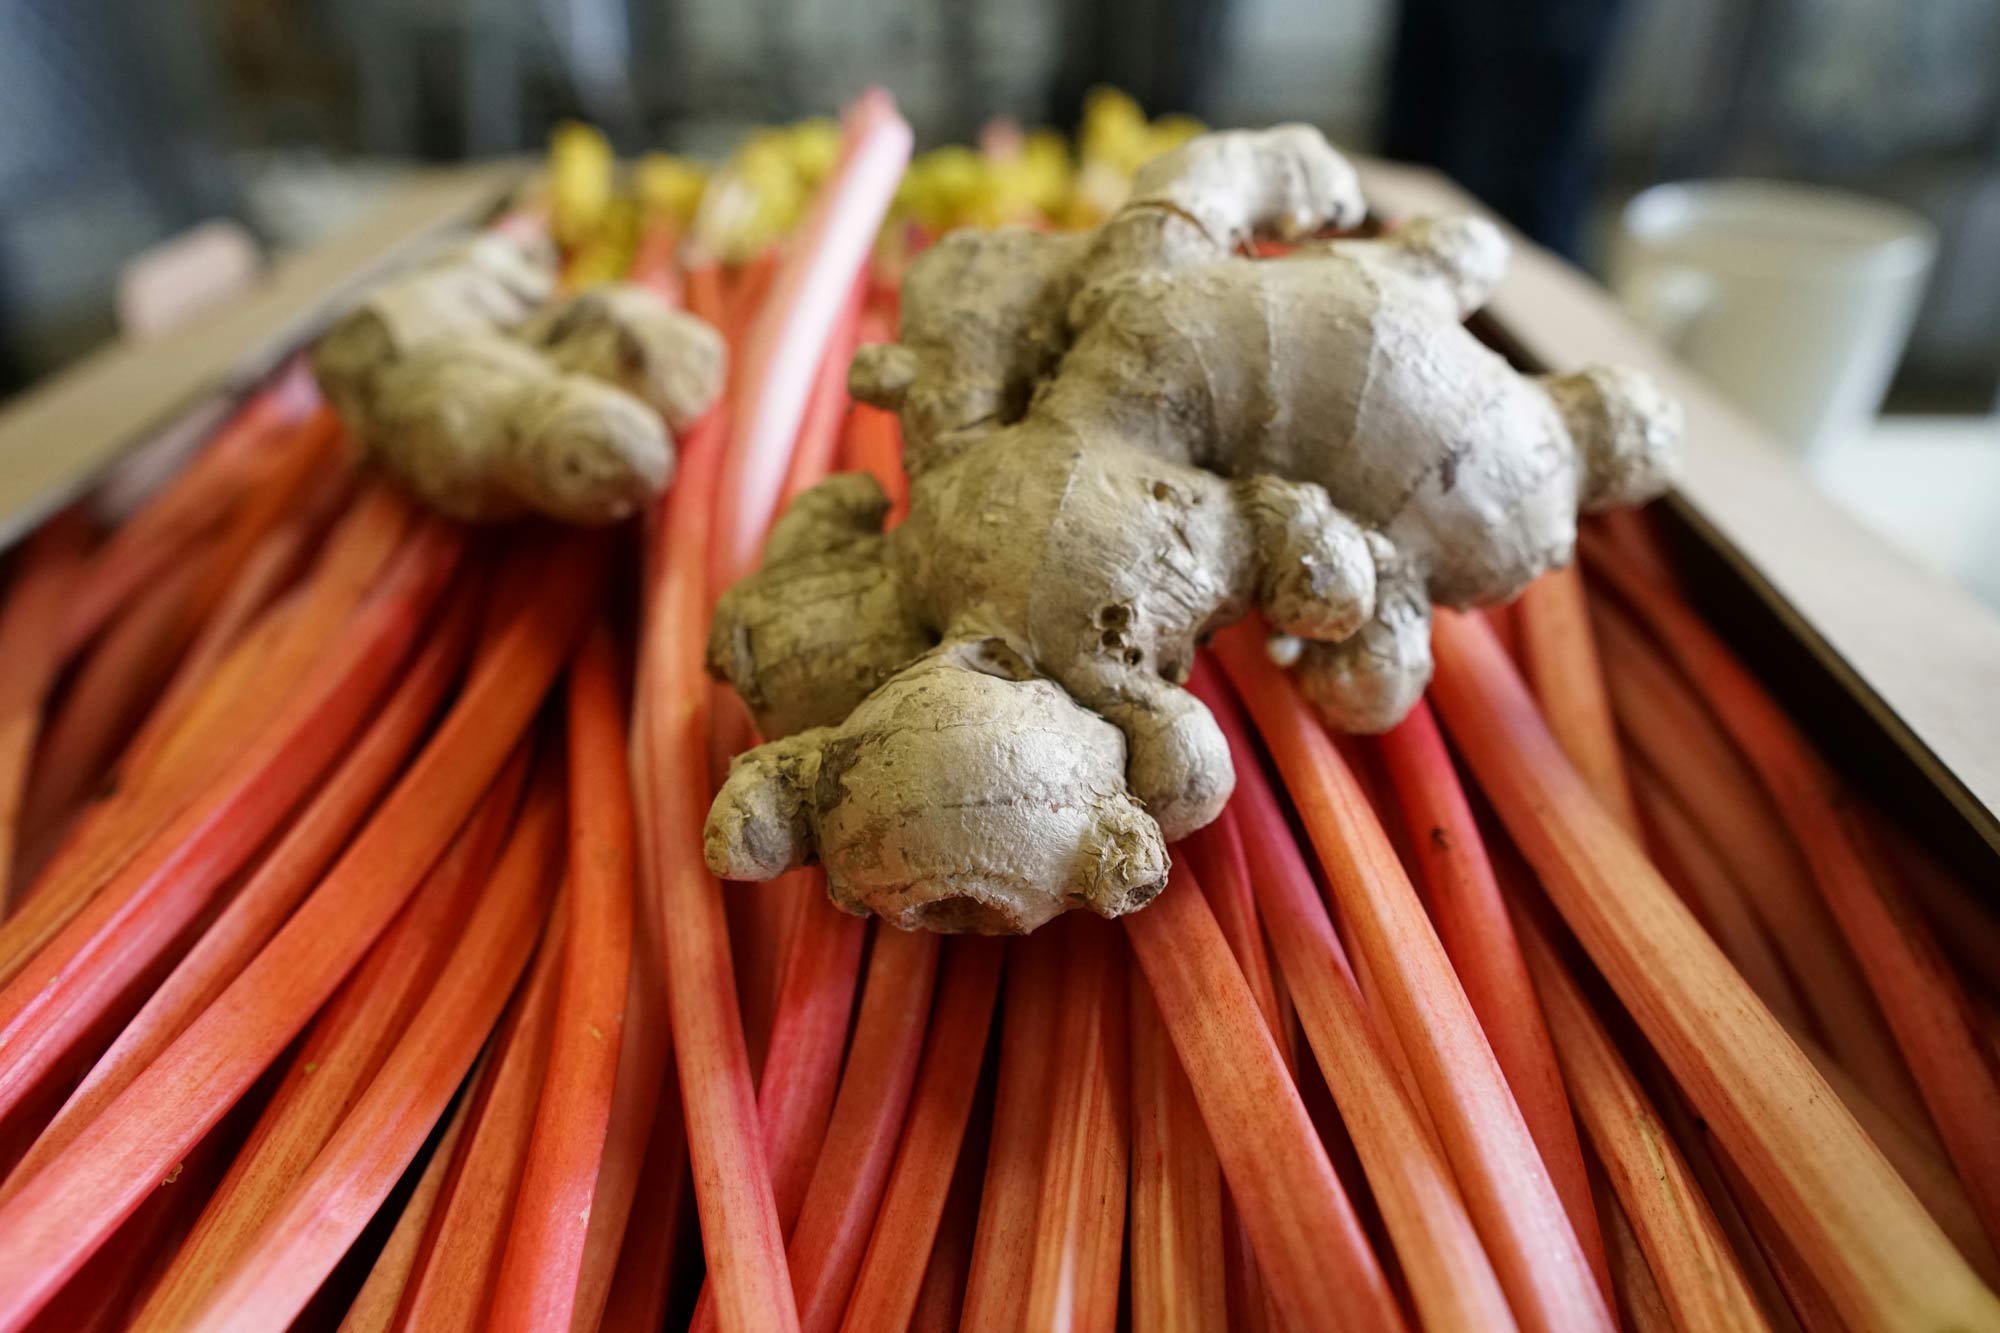 The rhubarb and ginger that will flavour the beer